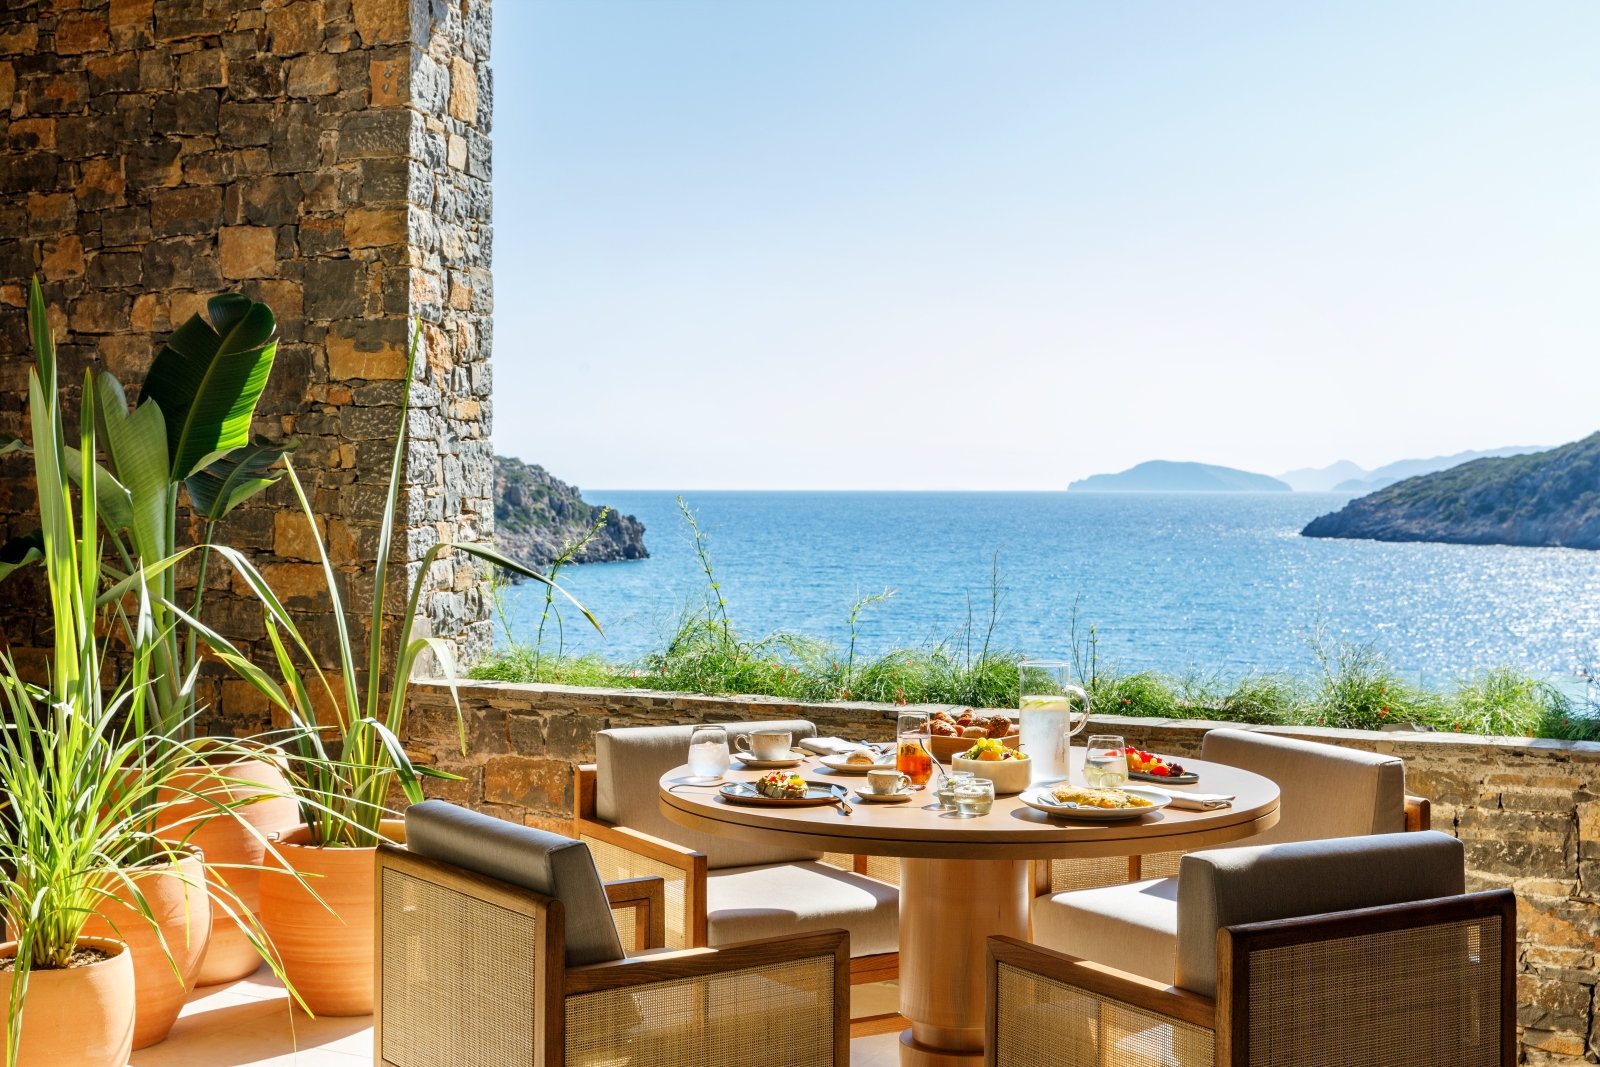 Breakfast on the terrace of Ocean Restaurant with views over the Mediterranean Sea at luxury resort Daios Cove in Greece